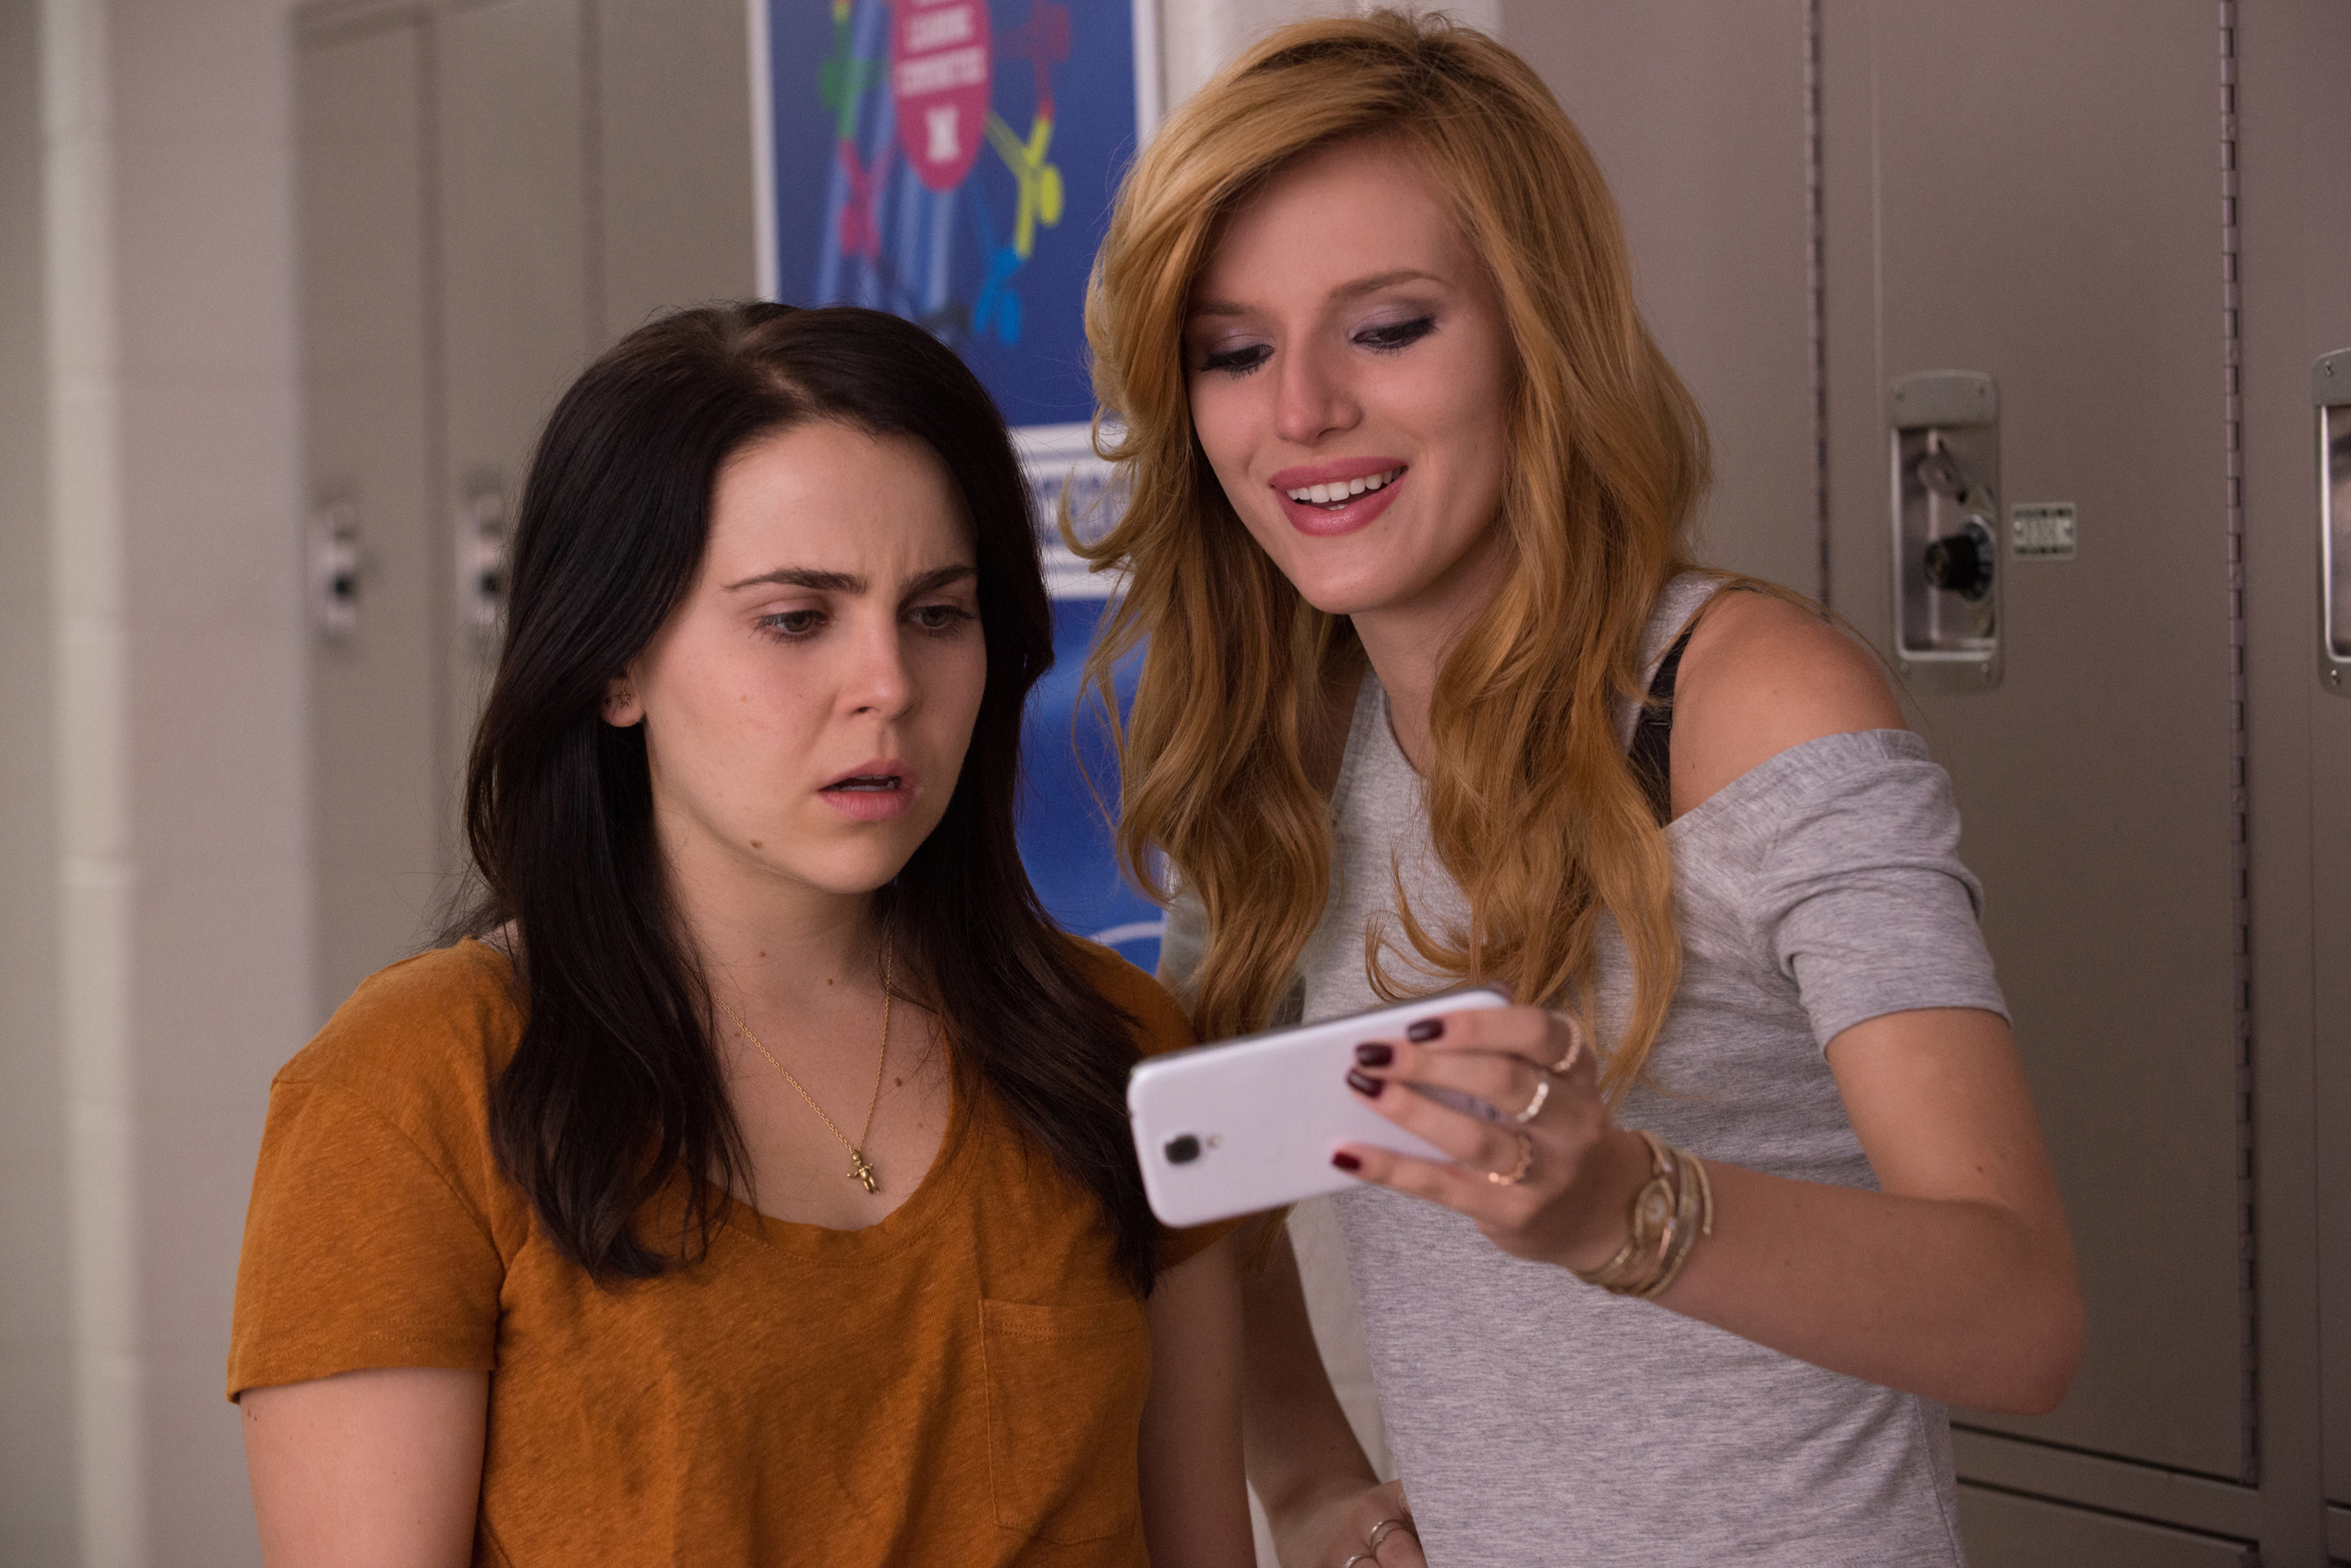 THE DUFF - 2015 FILM STILL - Mae Whitman and Bella Thorne - Photo Credit: Guy D Alema  
Lionsgate and CBS Films. © 2014 Granville Pictures Inc. All Rights Reserved.